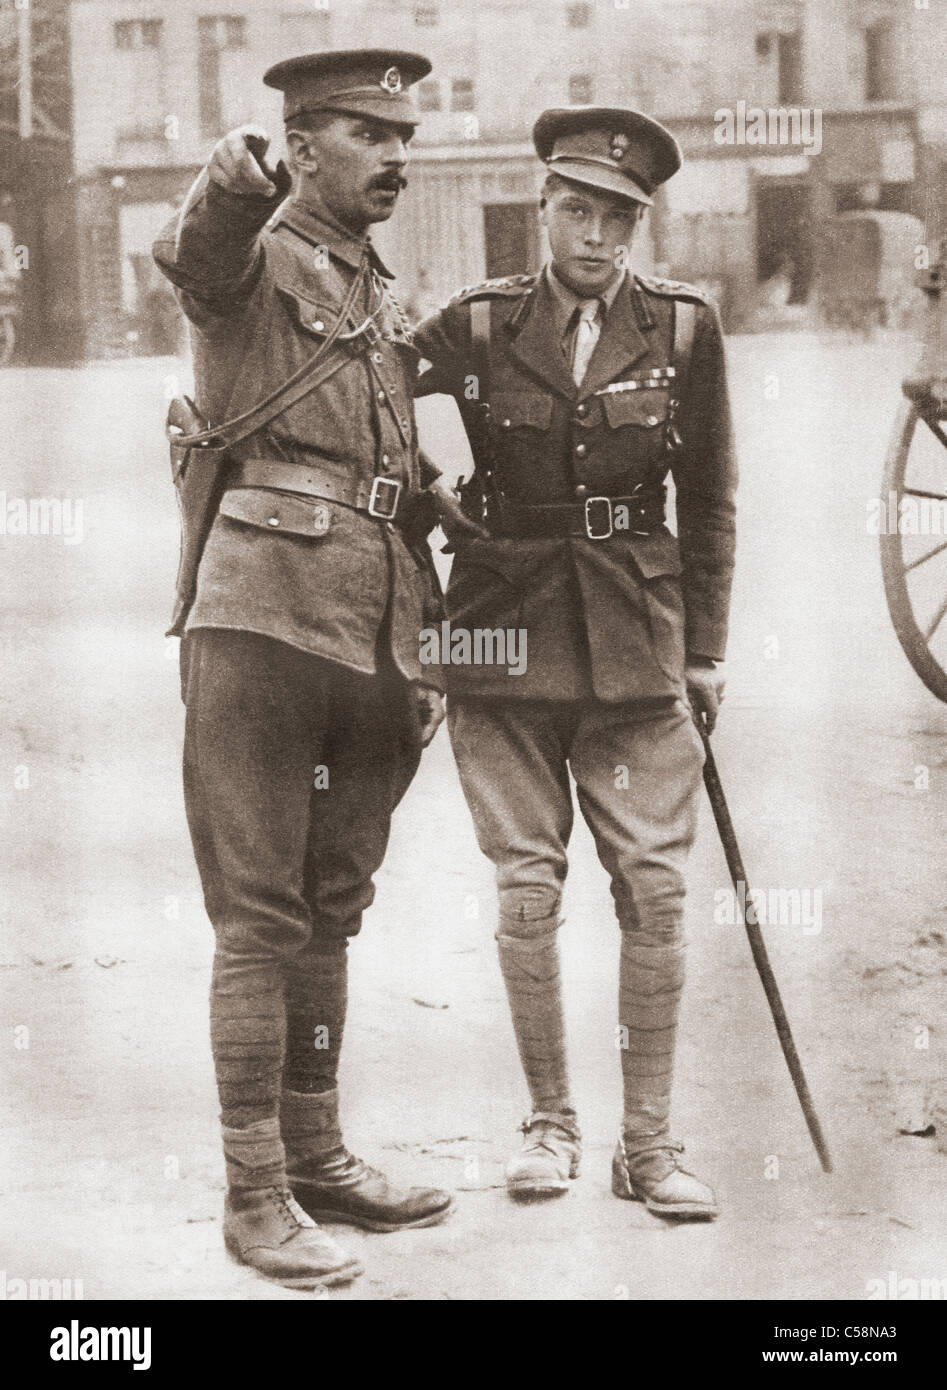 Prince of Wales, later King Edward VIII, in uniform during the First World War in 1914. Stock Photo